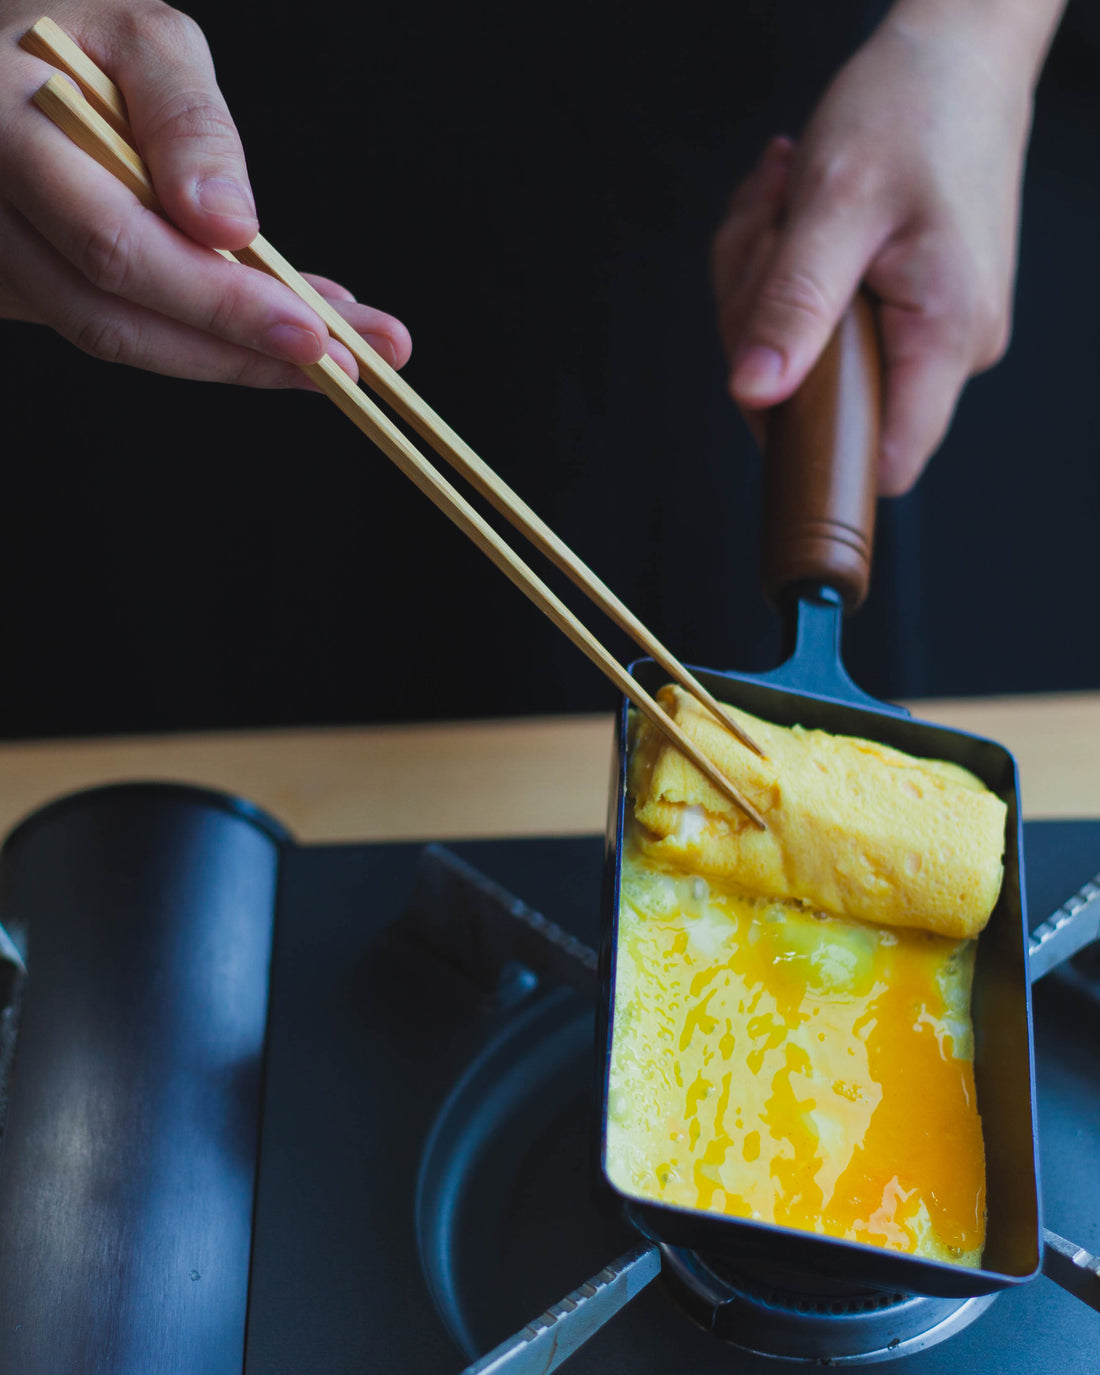 Learn how to cook Japanese Omelette Rolls!